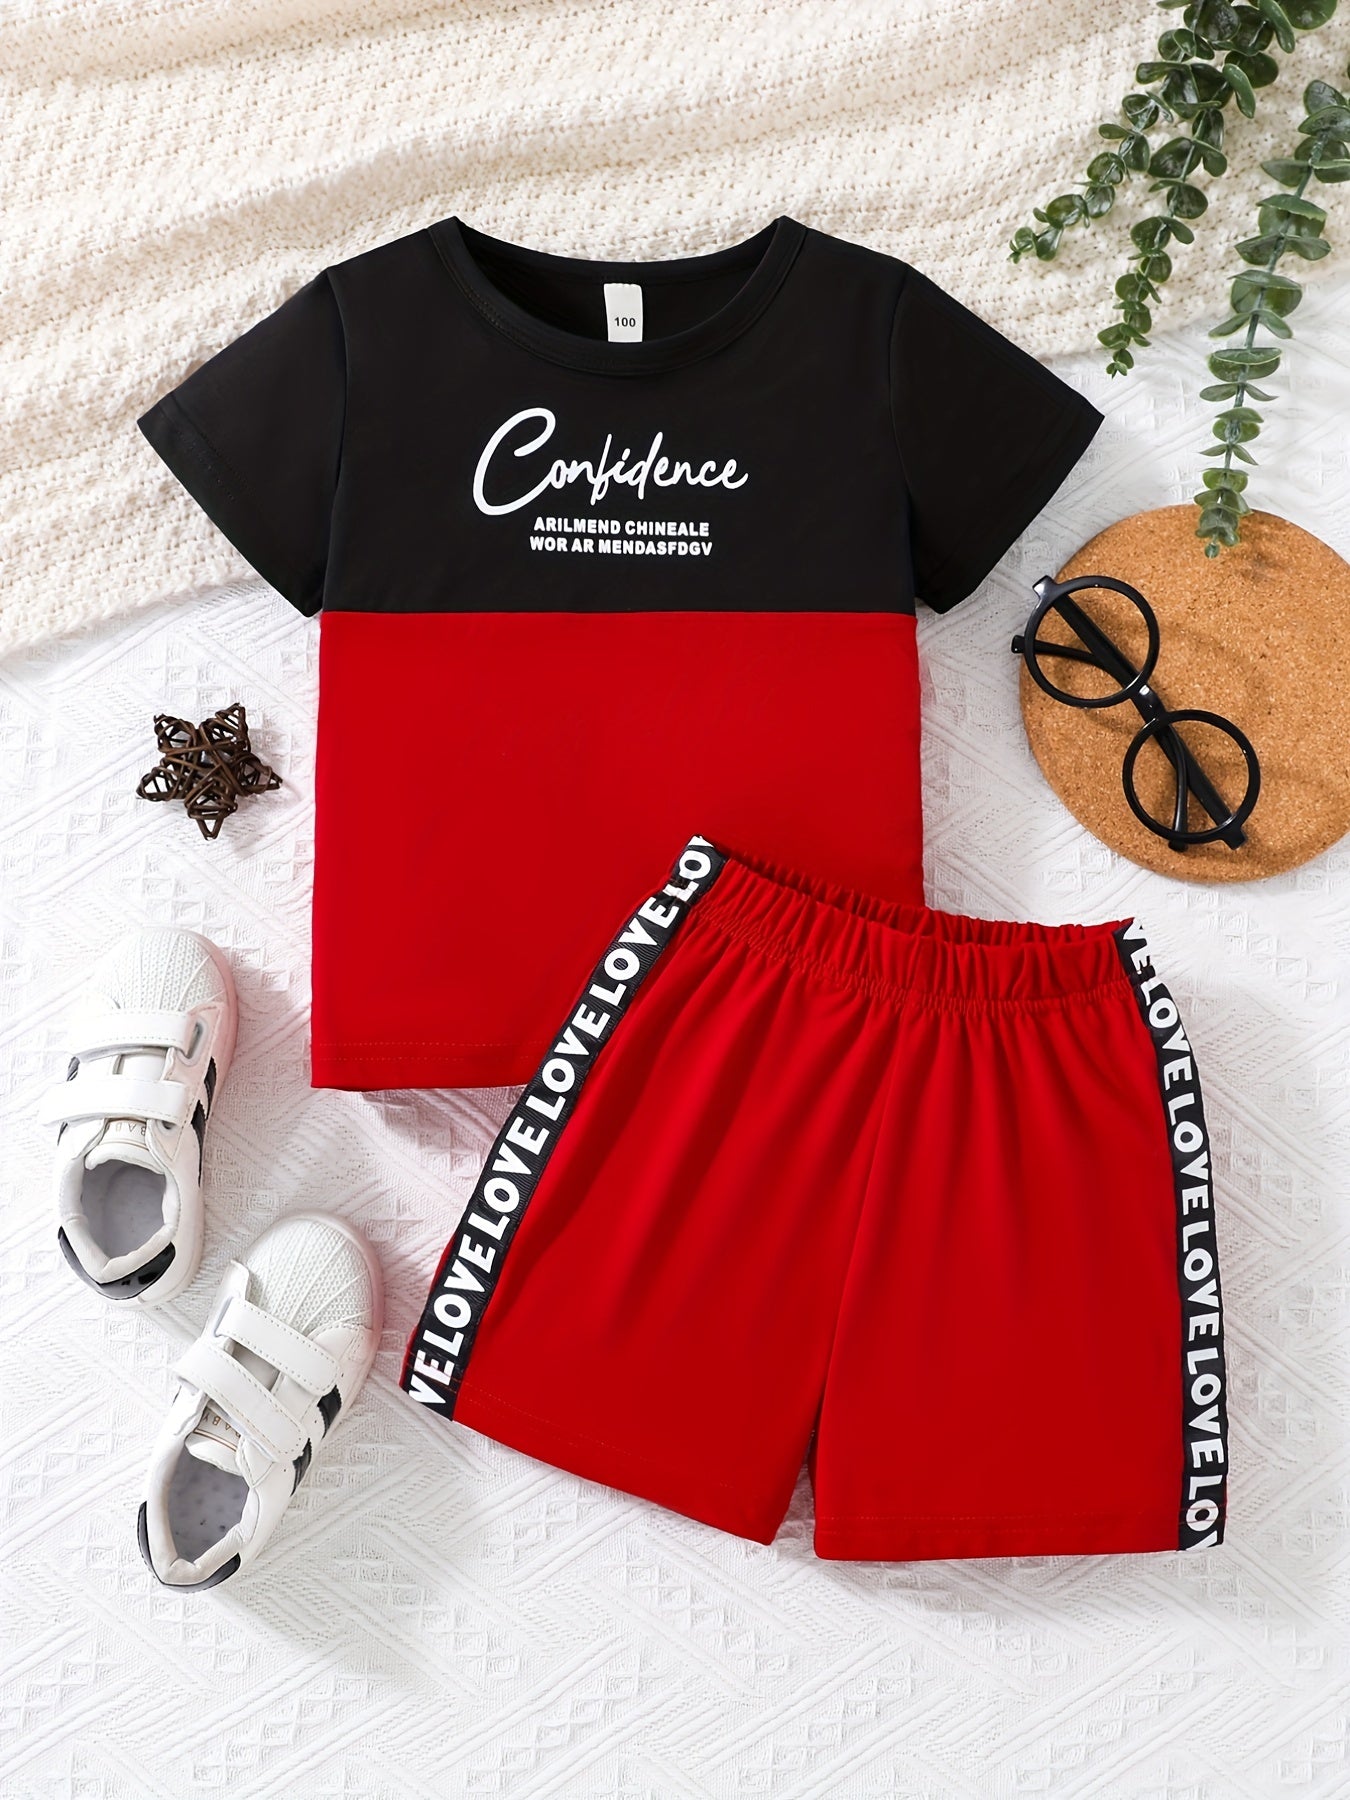 Boys Color Block Letter Outfit Shorts & T-shirt Short Sleeves Crew Neck Casual Summer Kids Clothes